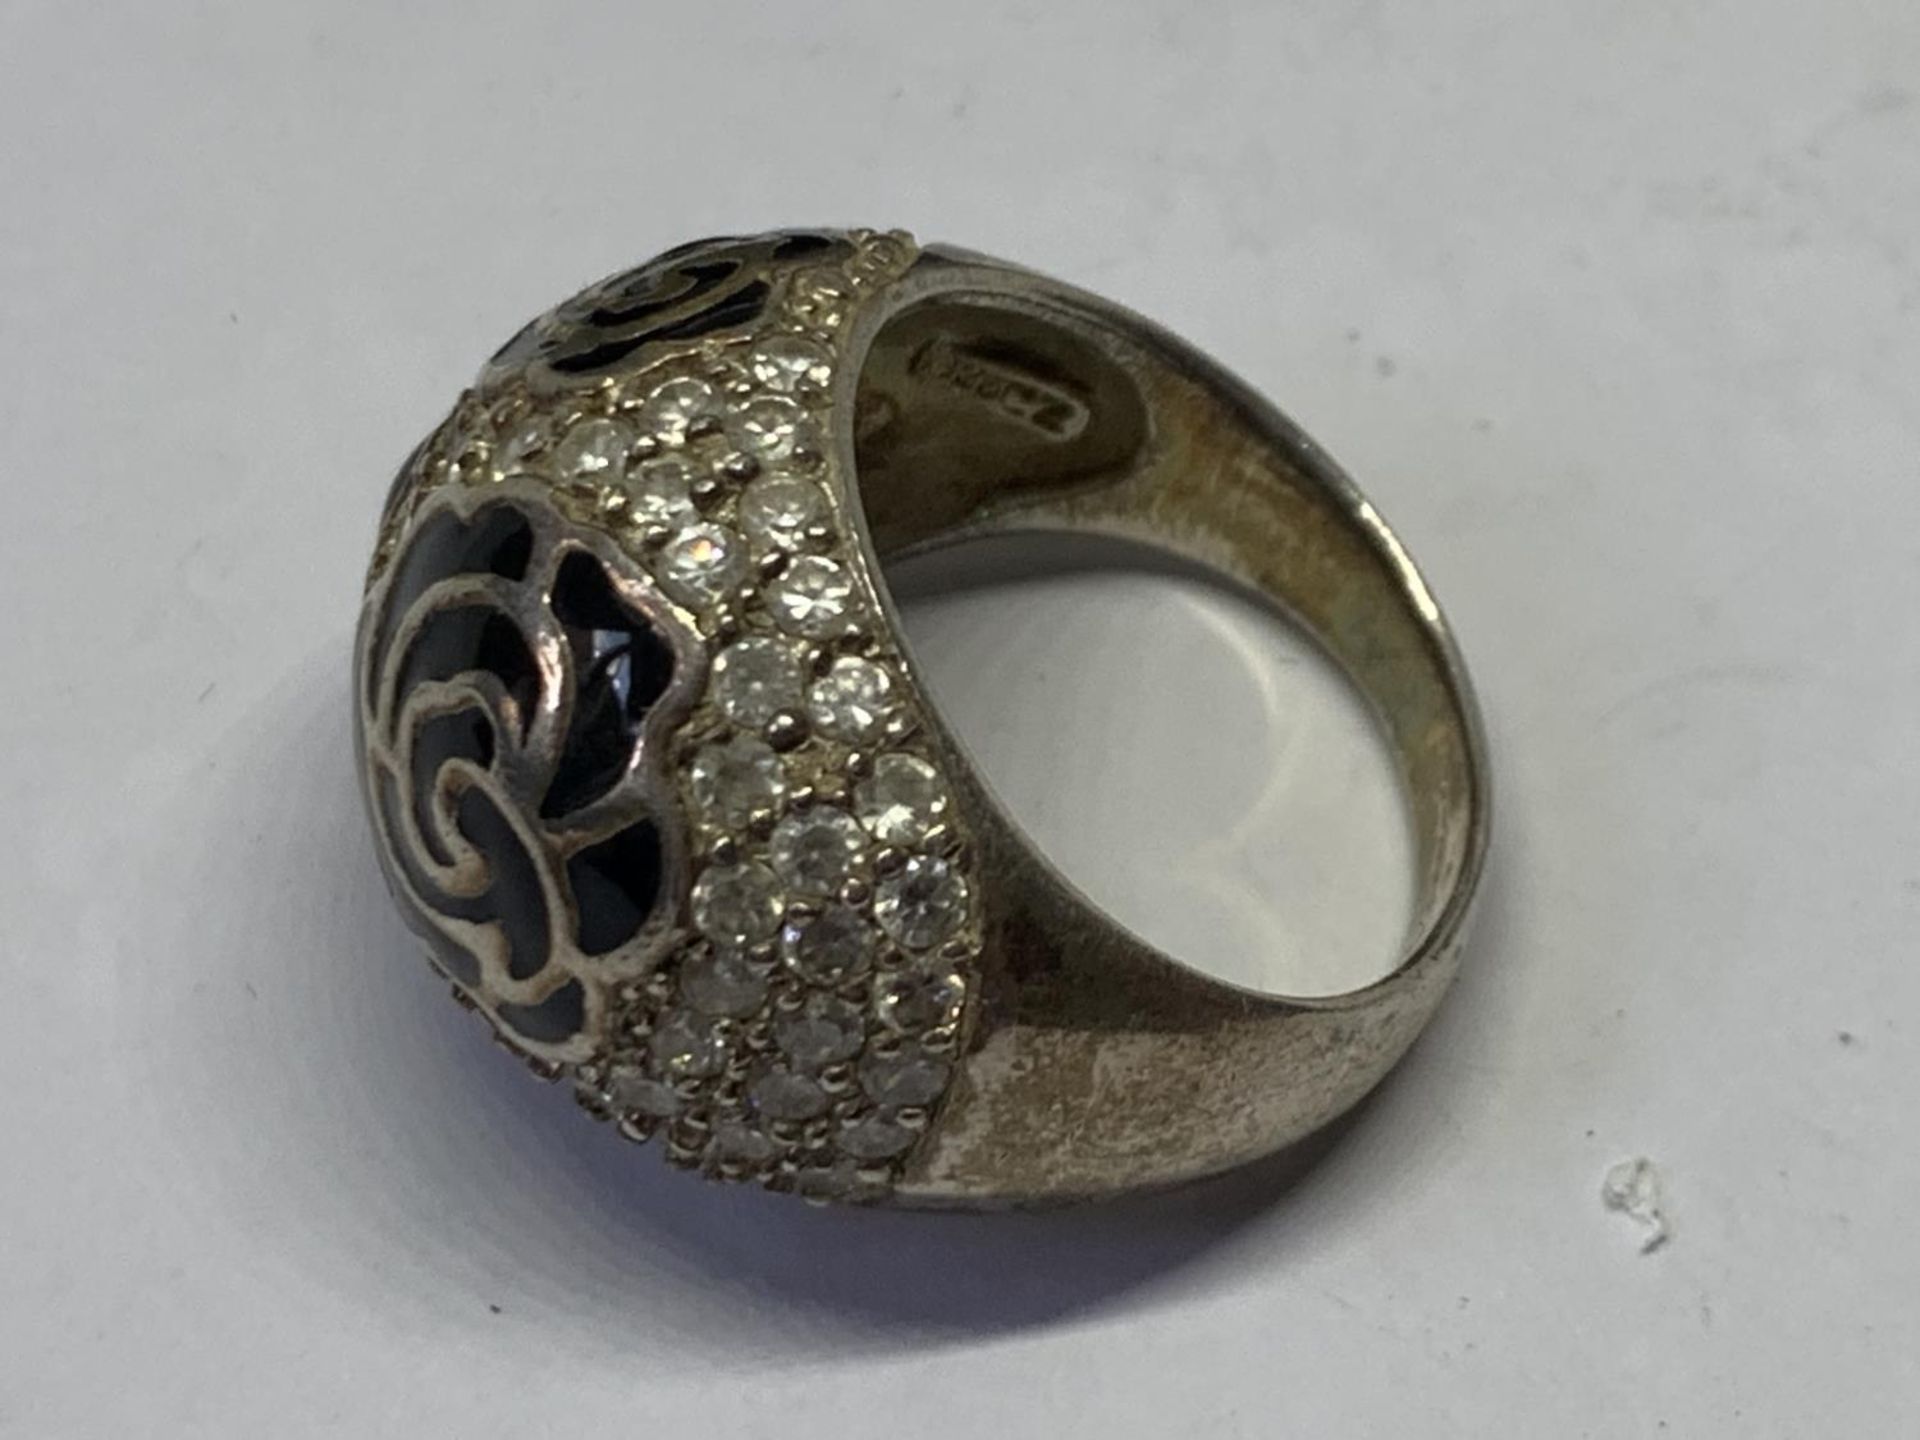 A SILVER AND BLACK RING IN A PRESENTATION BOX - Image 3 of 3